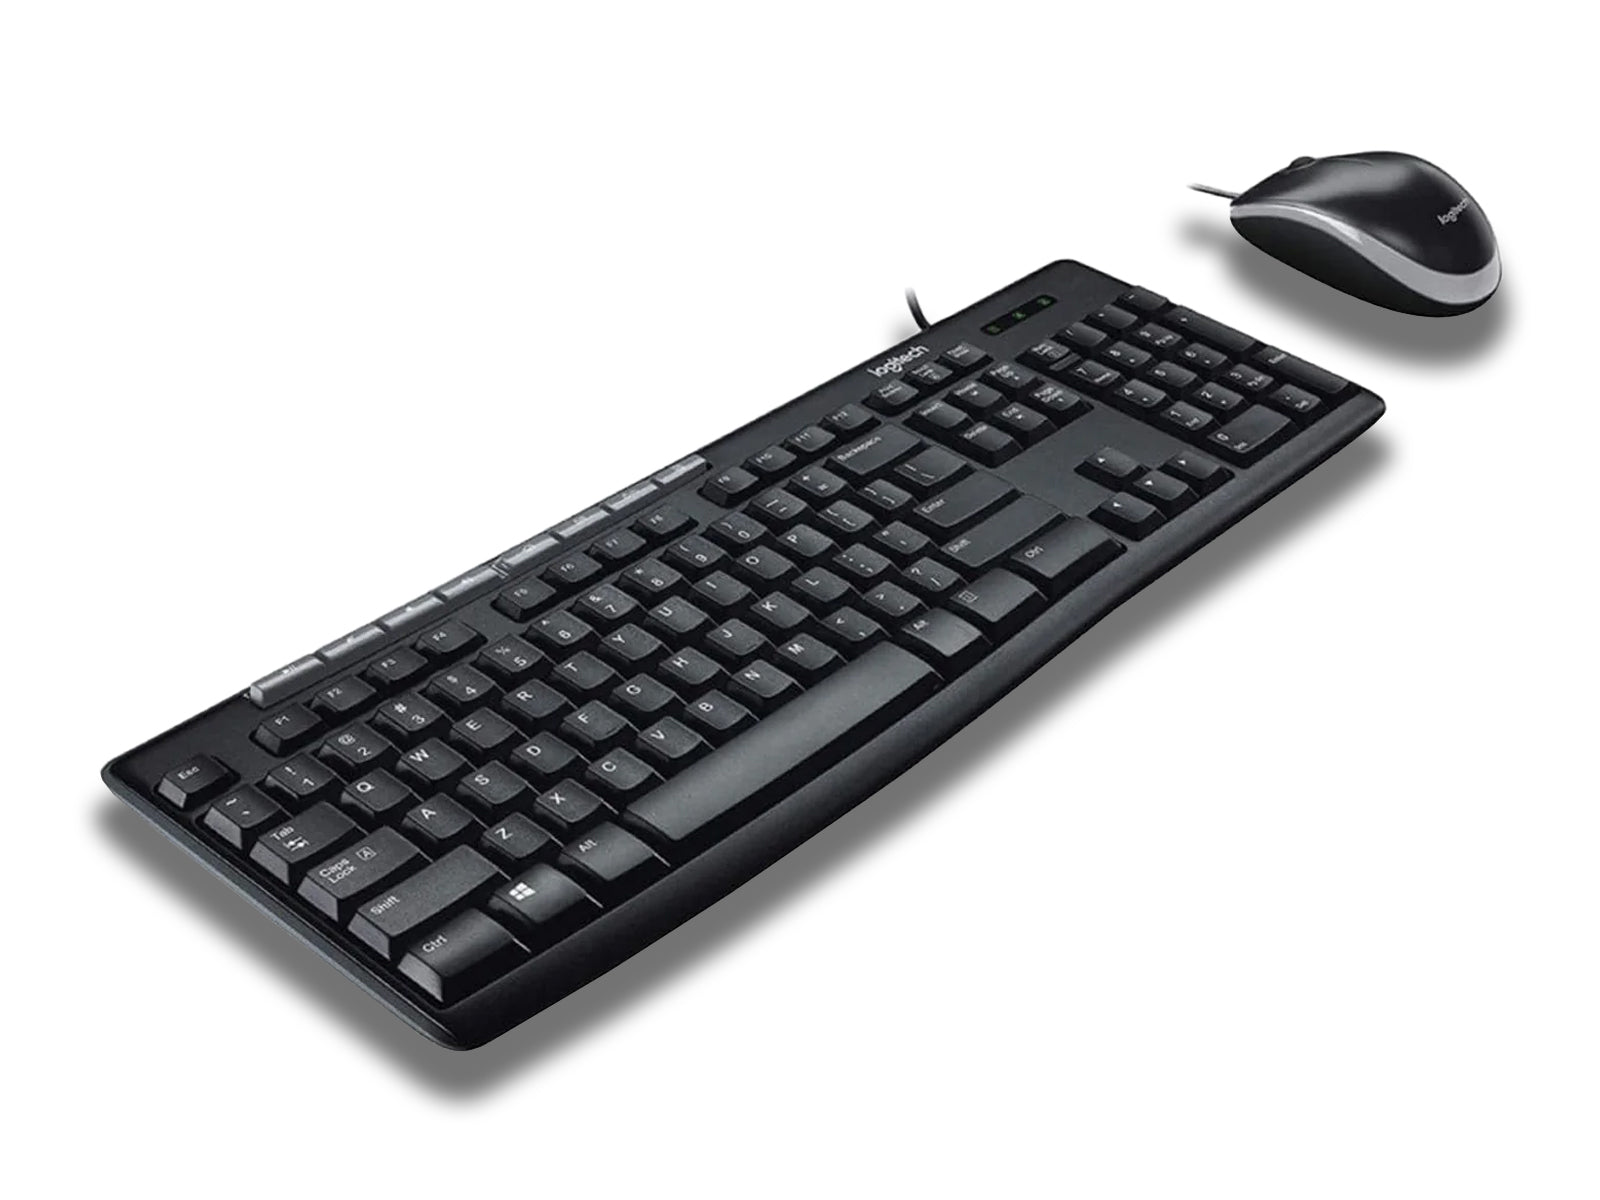 Image shows a left top veiw of the Logitech MK200 Combo Keyboard & Mouse on a white background